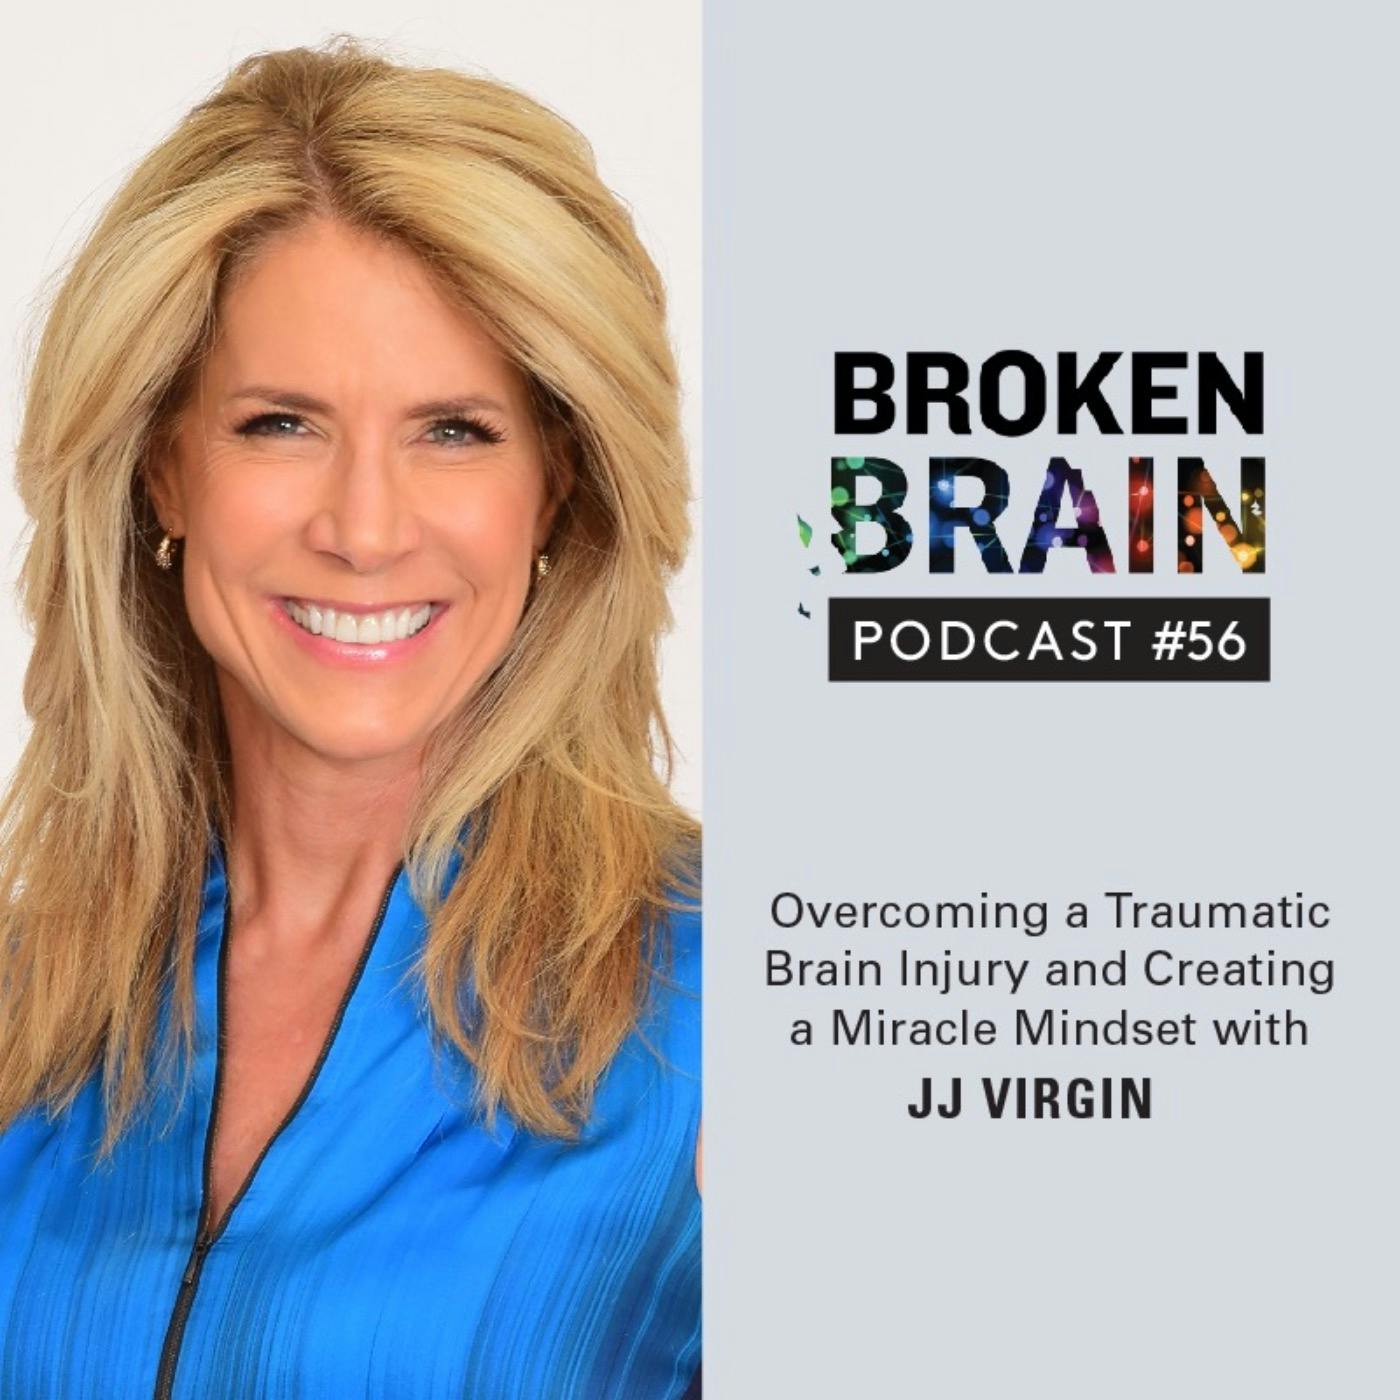 #56: Overcoming a Traumatic Brain Injury and Creating a Miracle Mindset with JJ Virgin